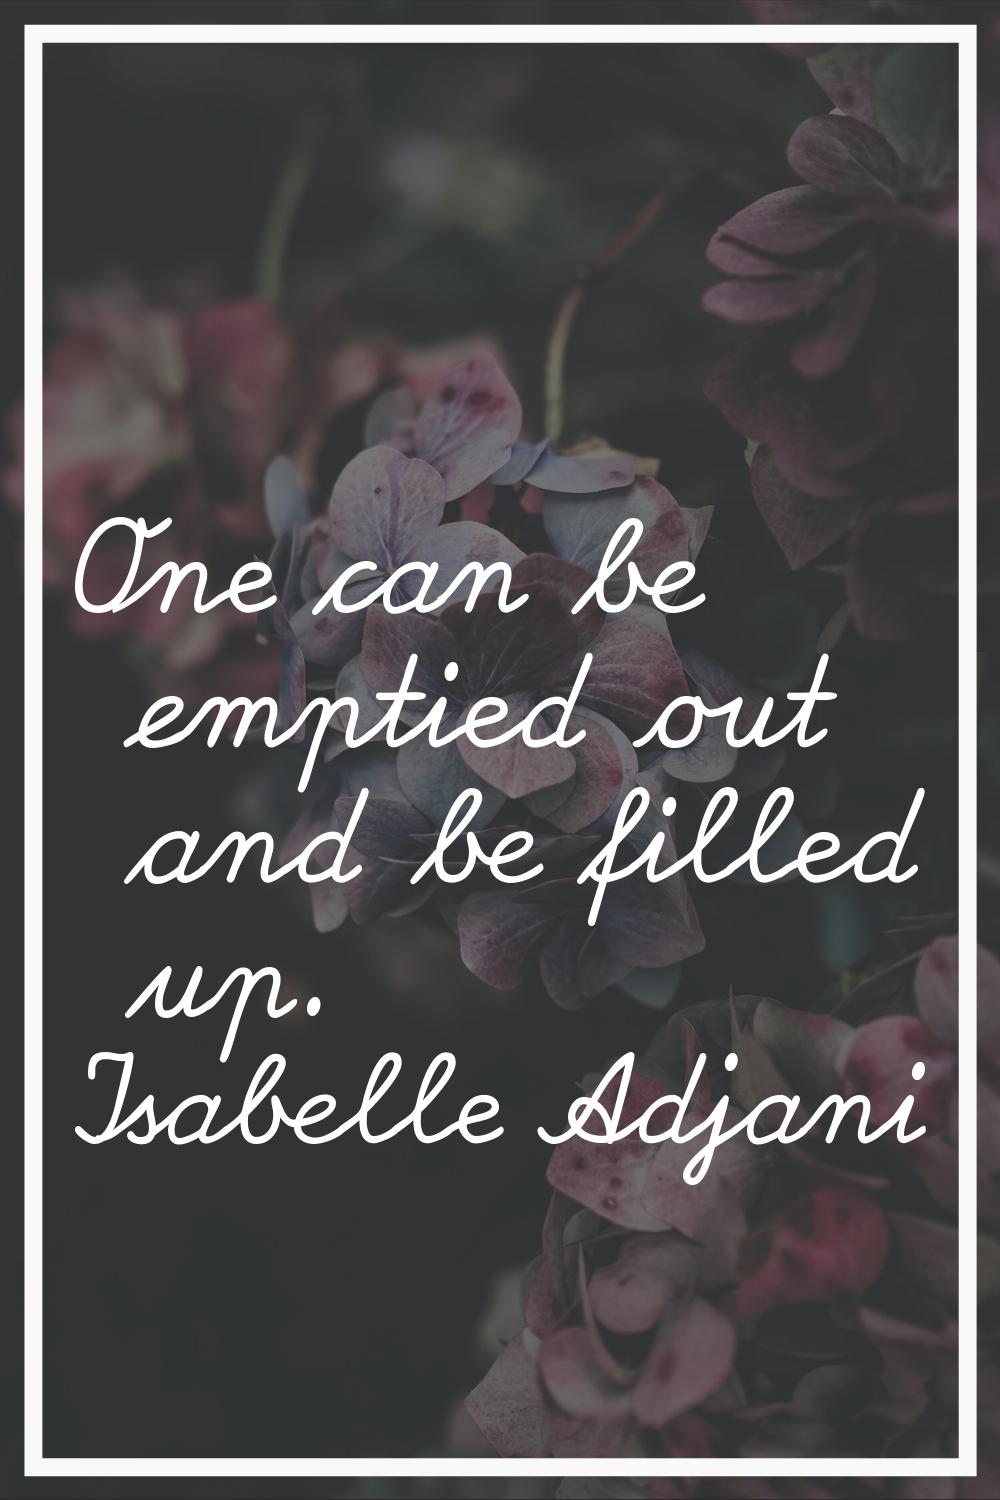 One can be emptied out and be filled up.